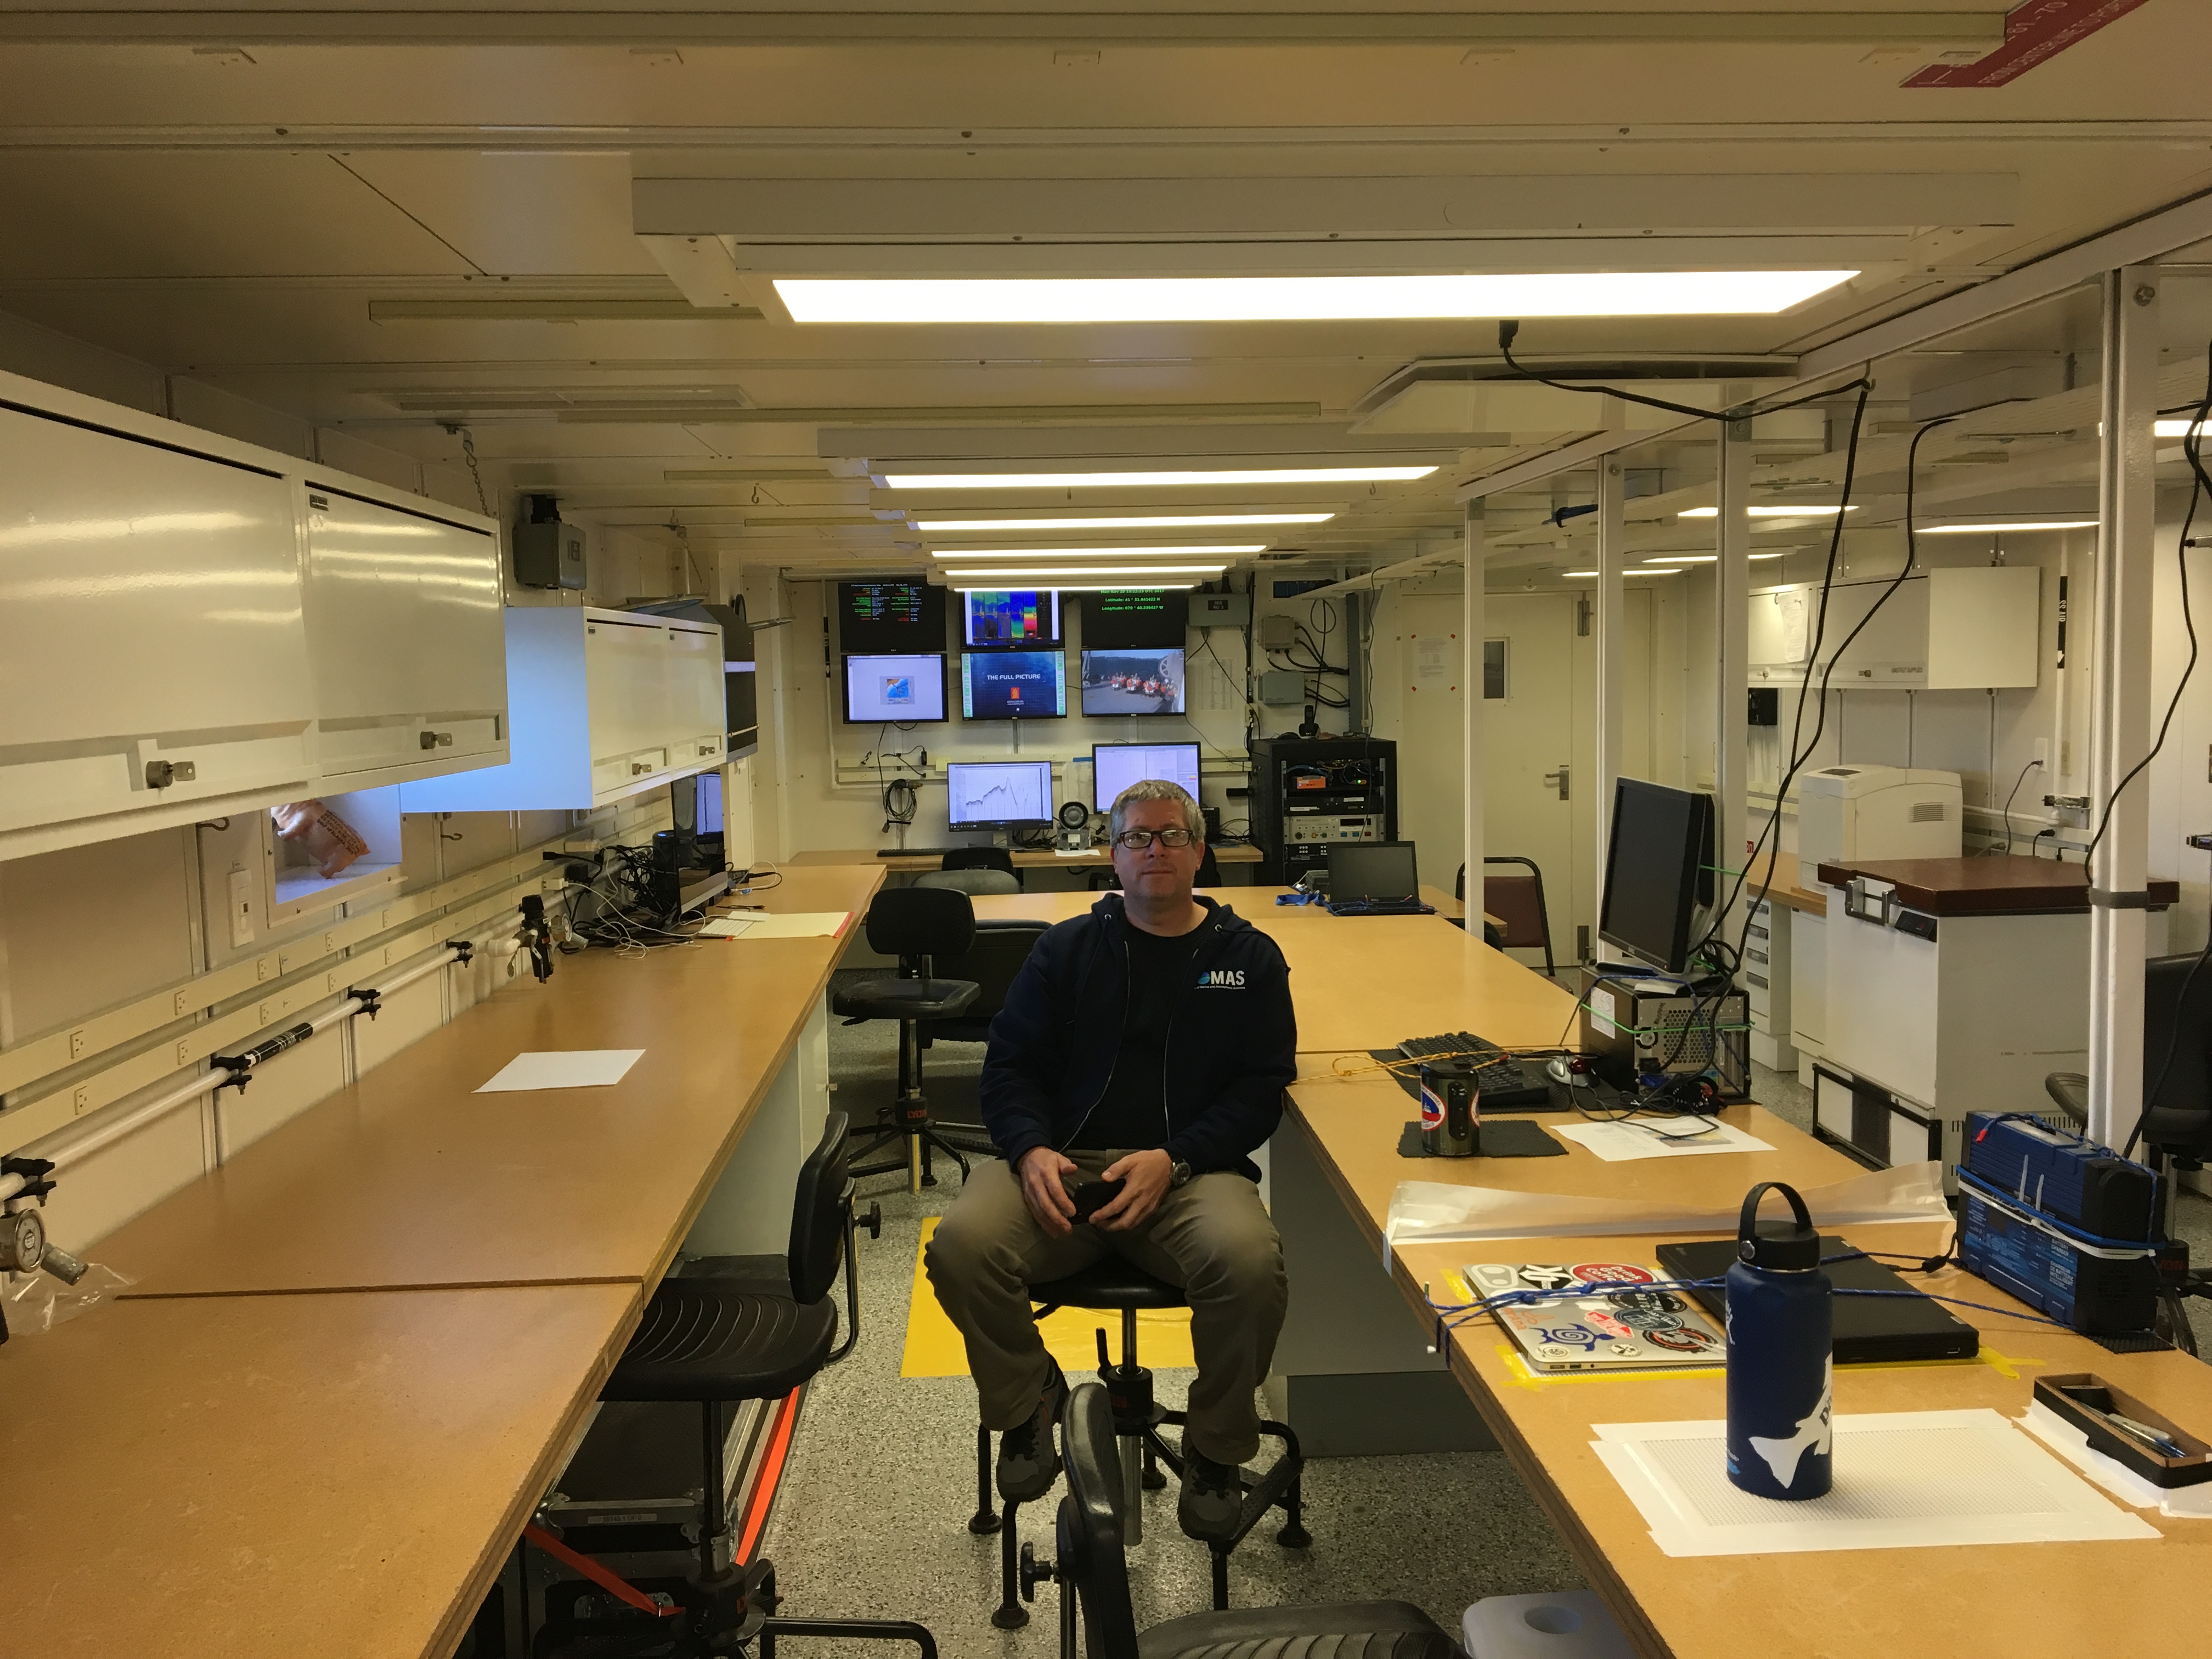 ADEON’s Chief Scientist for this cruise – Joe Warren taking in the fully secure and immaculate lab space on the R/V Armstrong before leaving the dock.